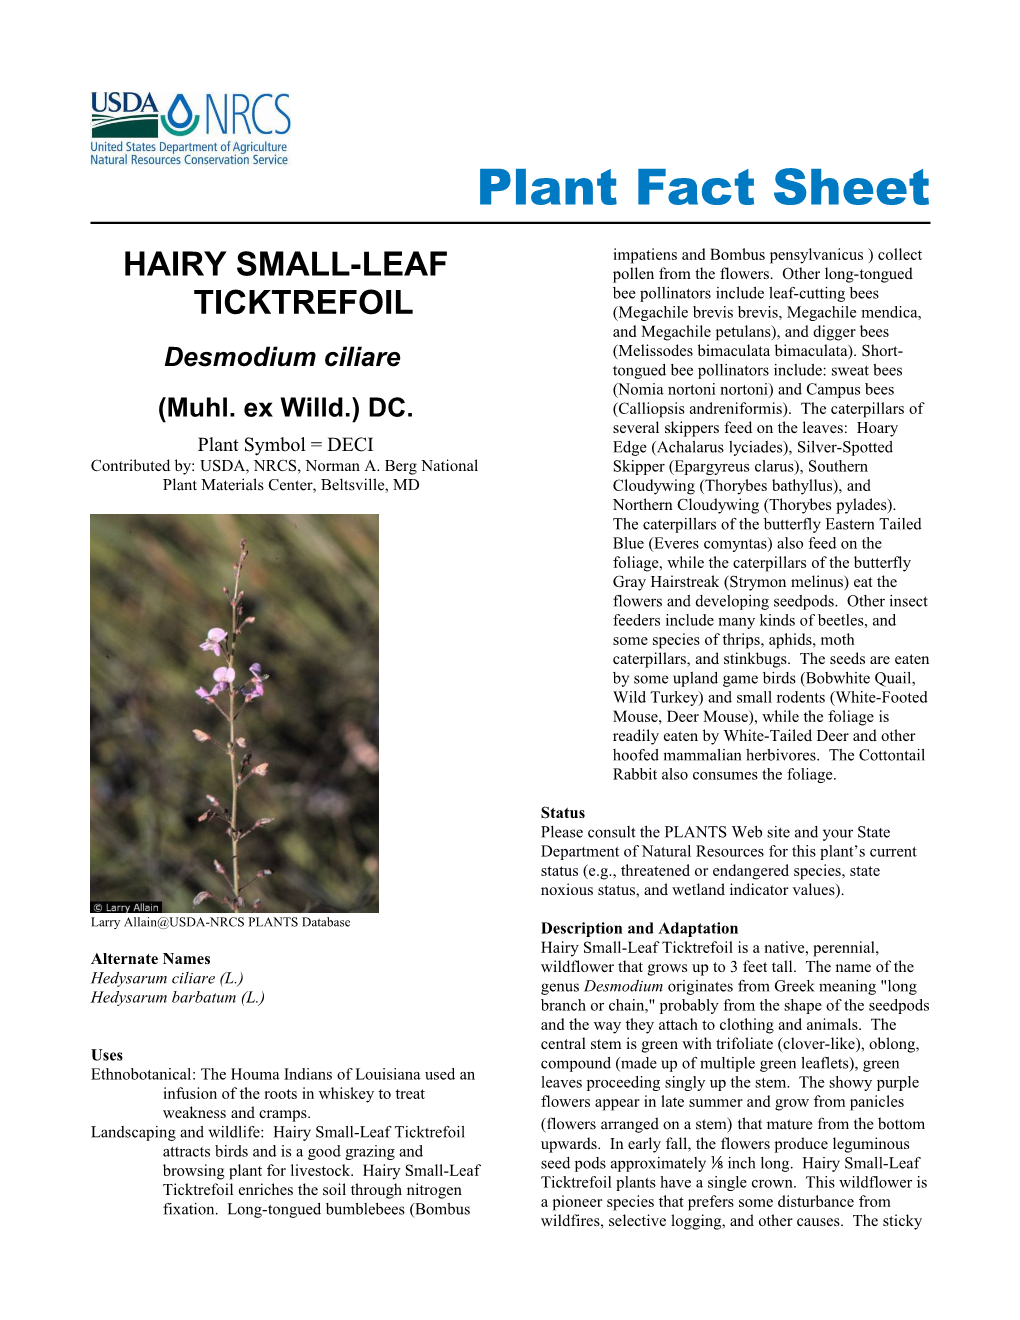 Hairy Small Leaf Ticktrefoil (Desmodium Ciliare) Plant Fact Sheet